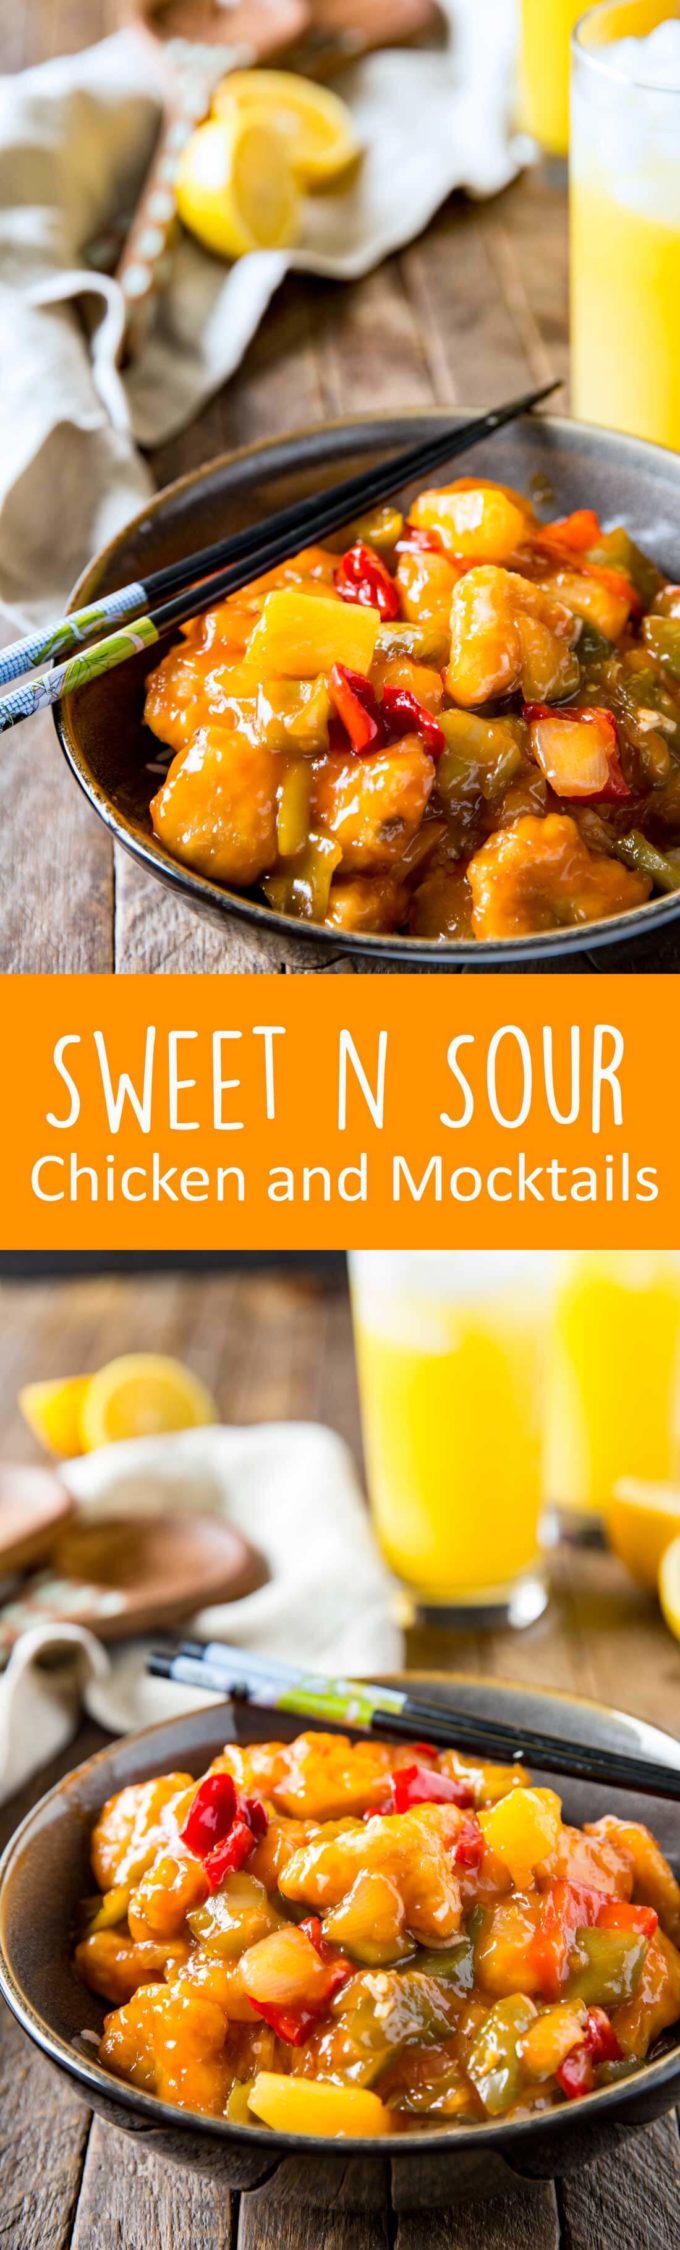 Sweet and Sour Mocktail and Chicken dinner